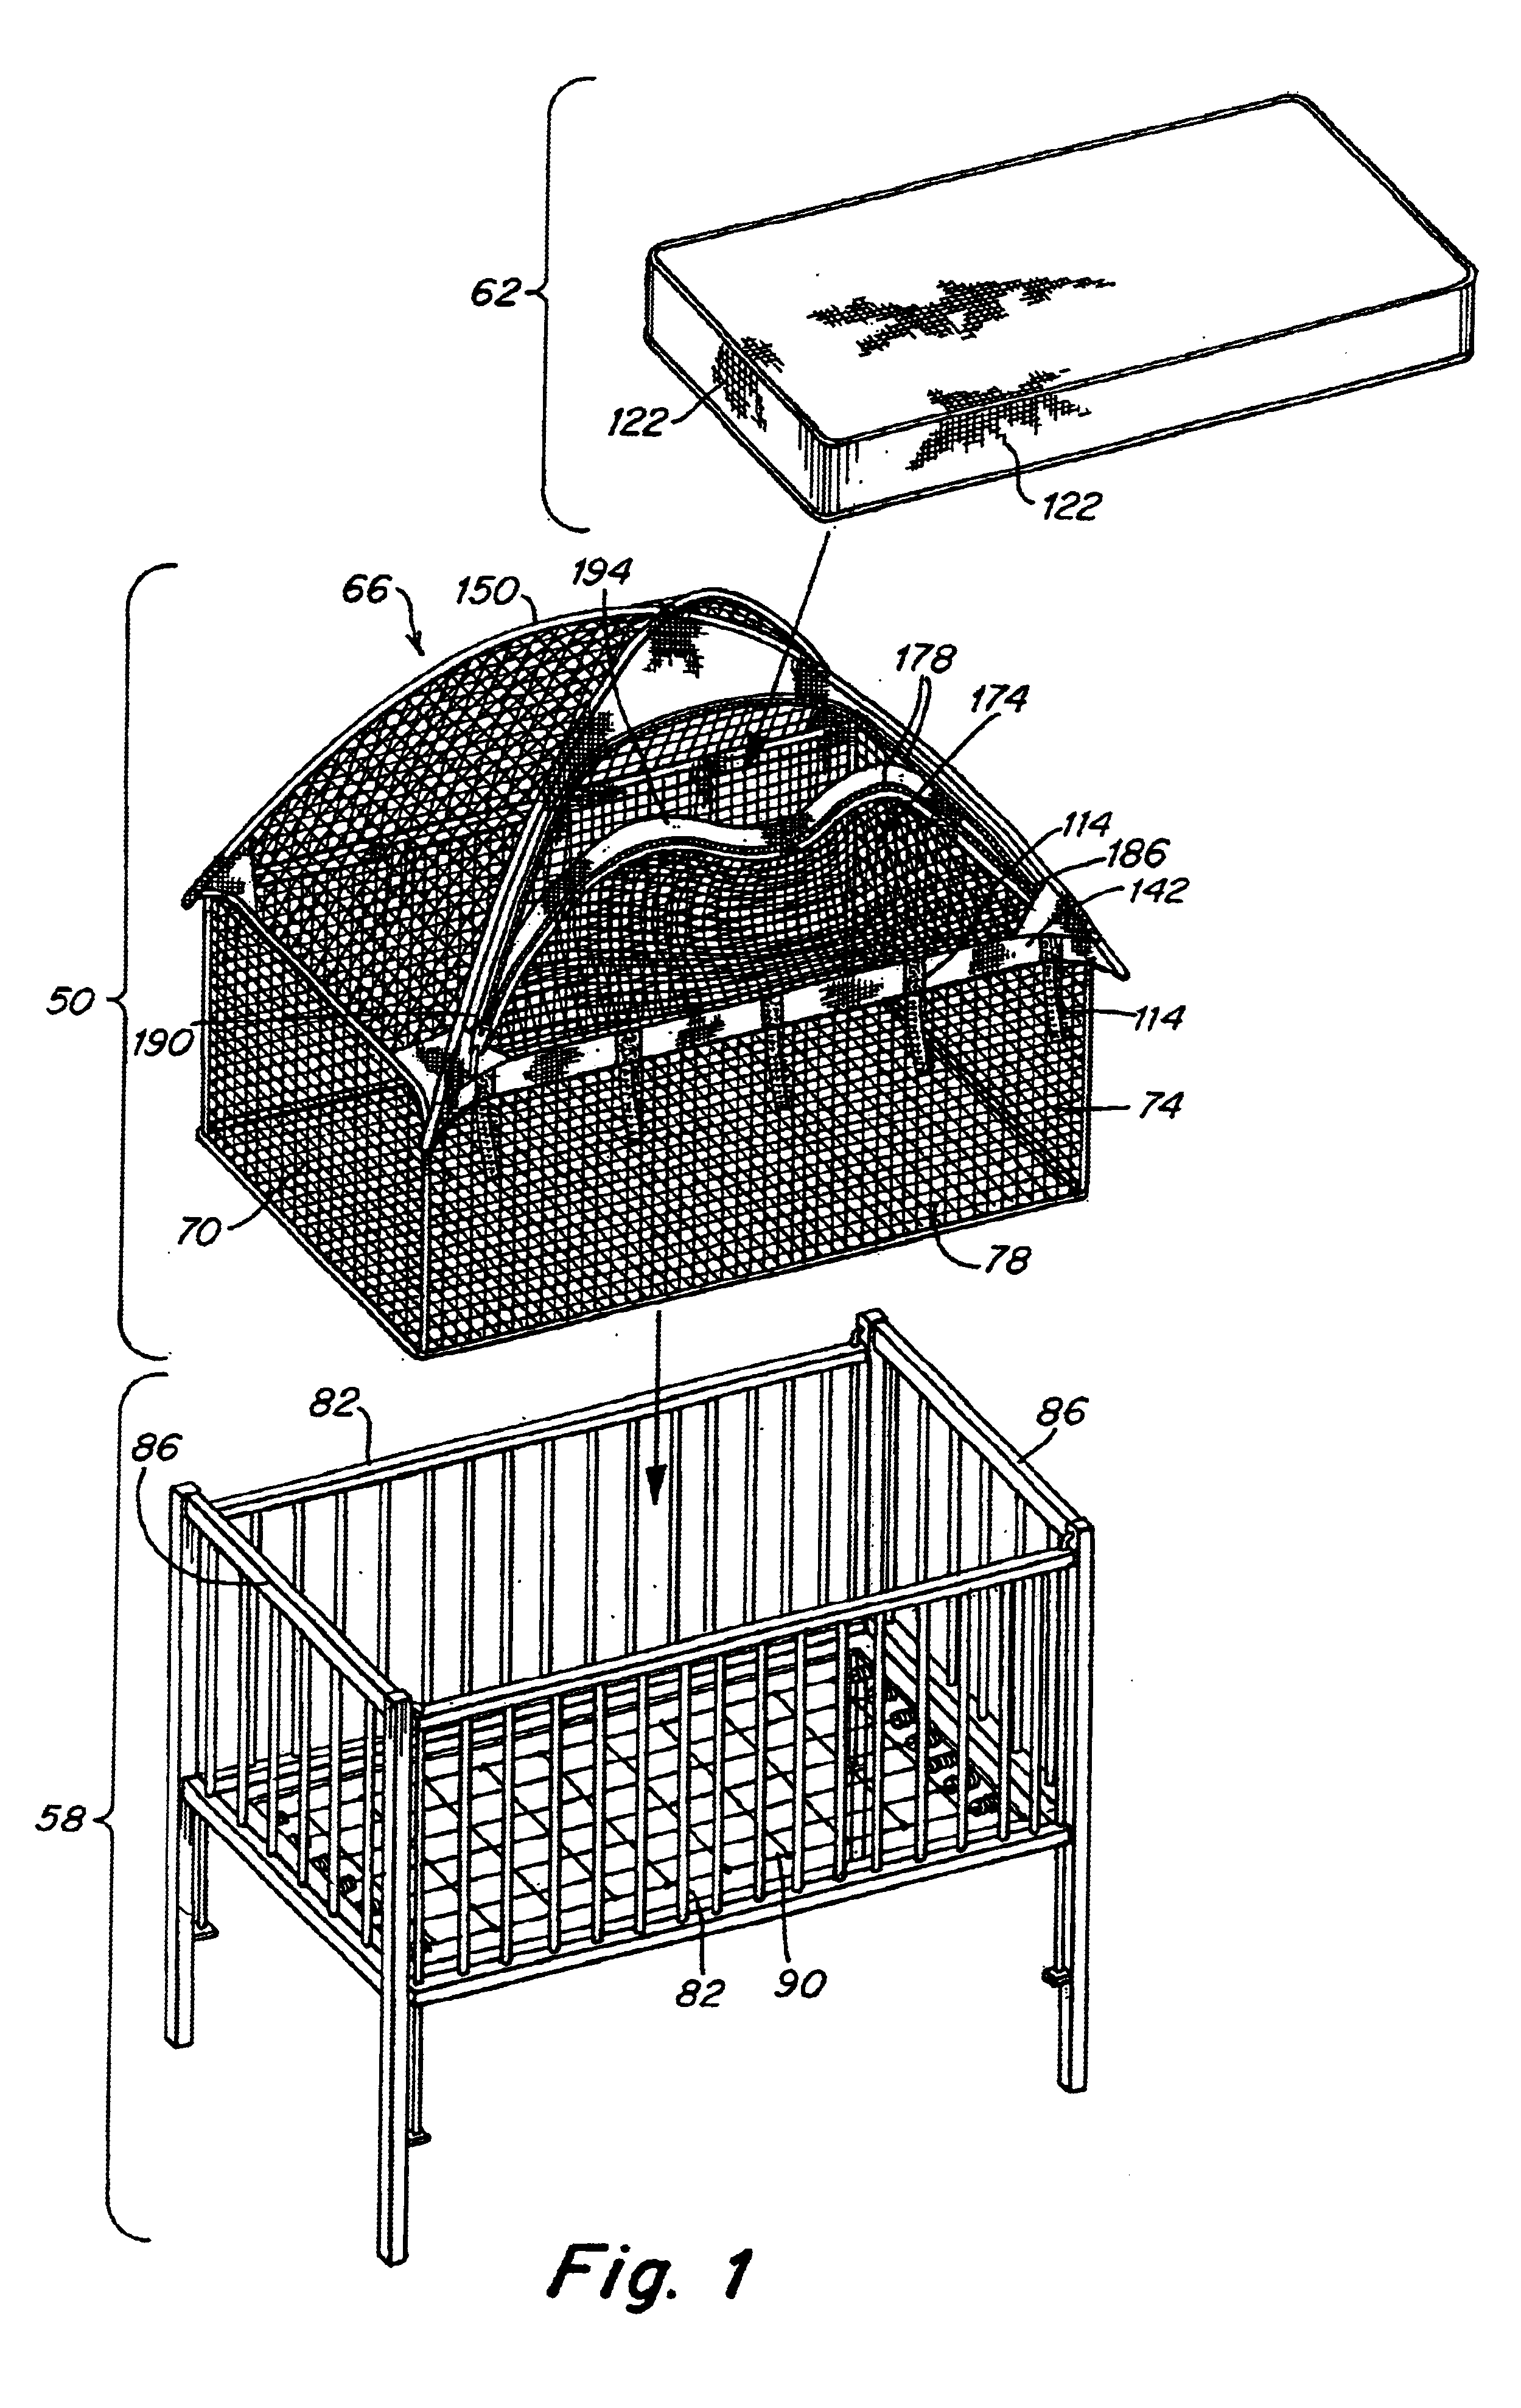 Crib and playpen protective enclosure